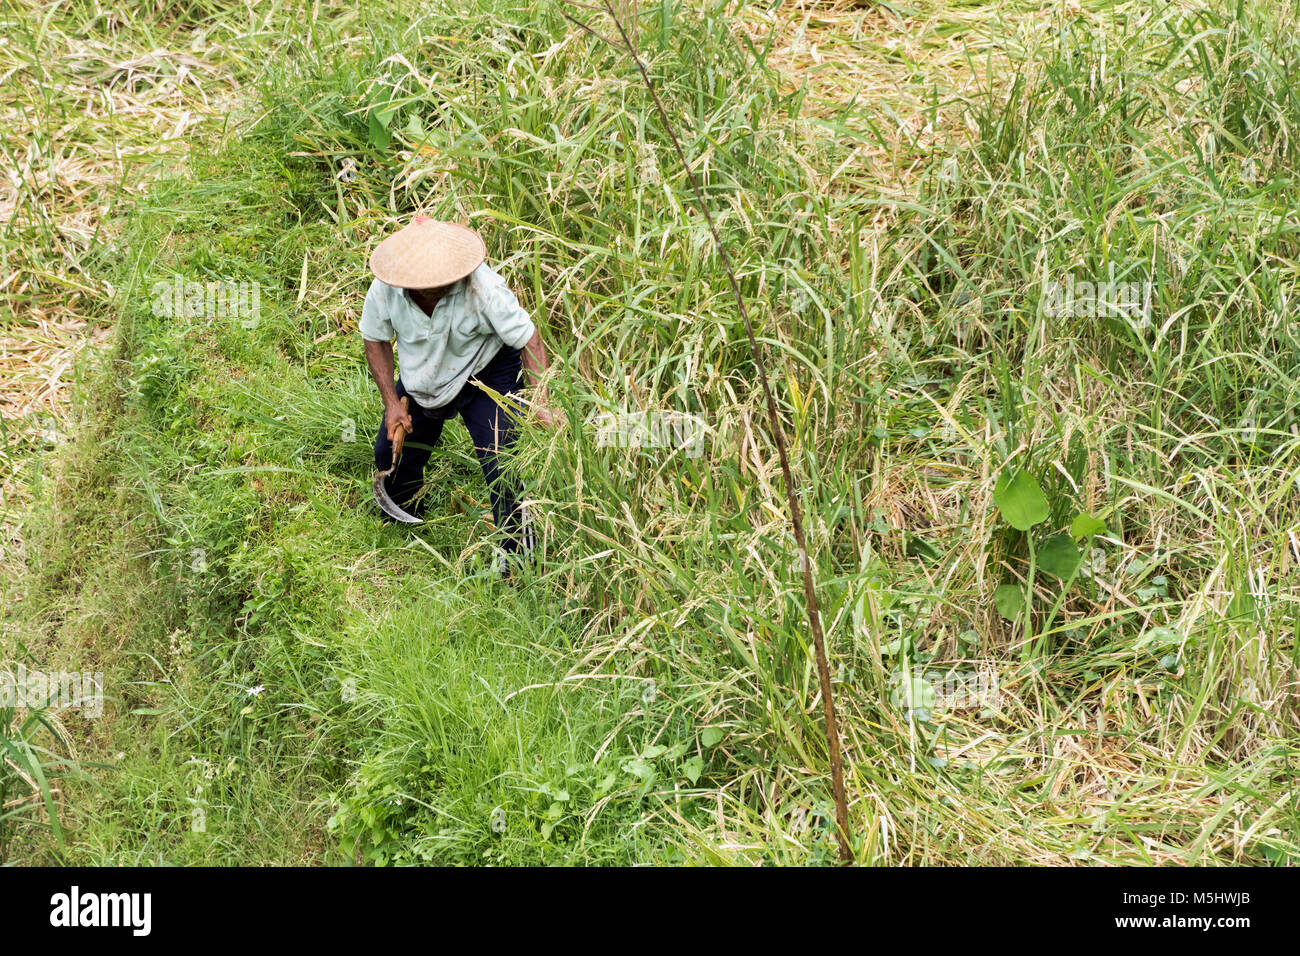 Farmer in coolie hat cutting ripe rice with a scythe, Tegallalang Rice Terraces, Ubud, Bali Stock Photo